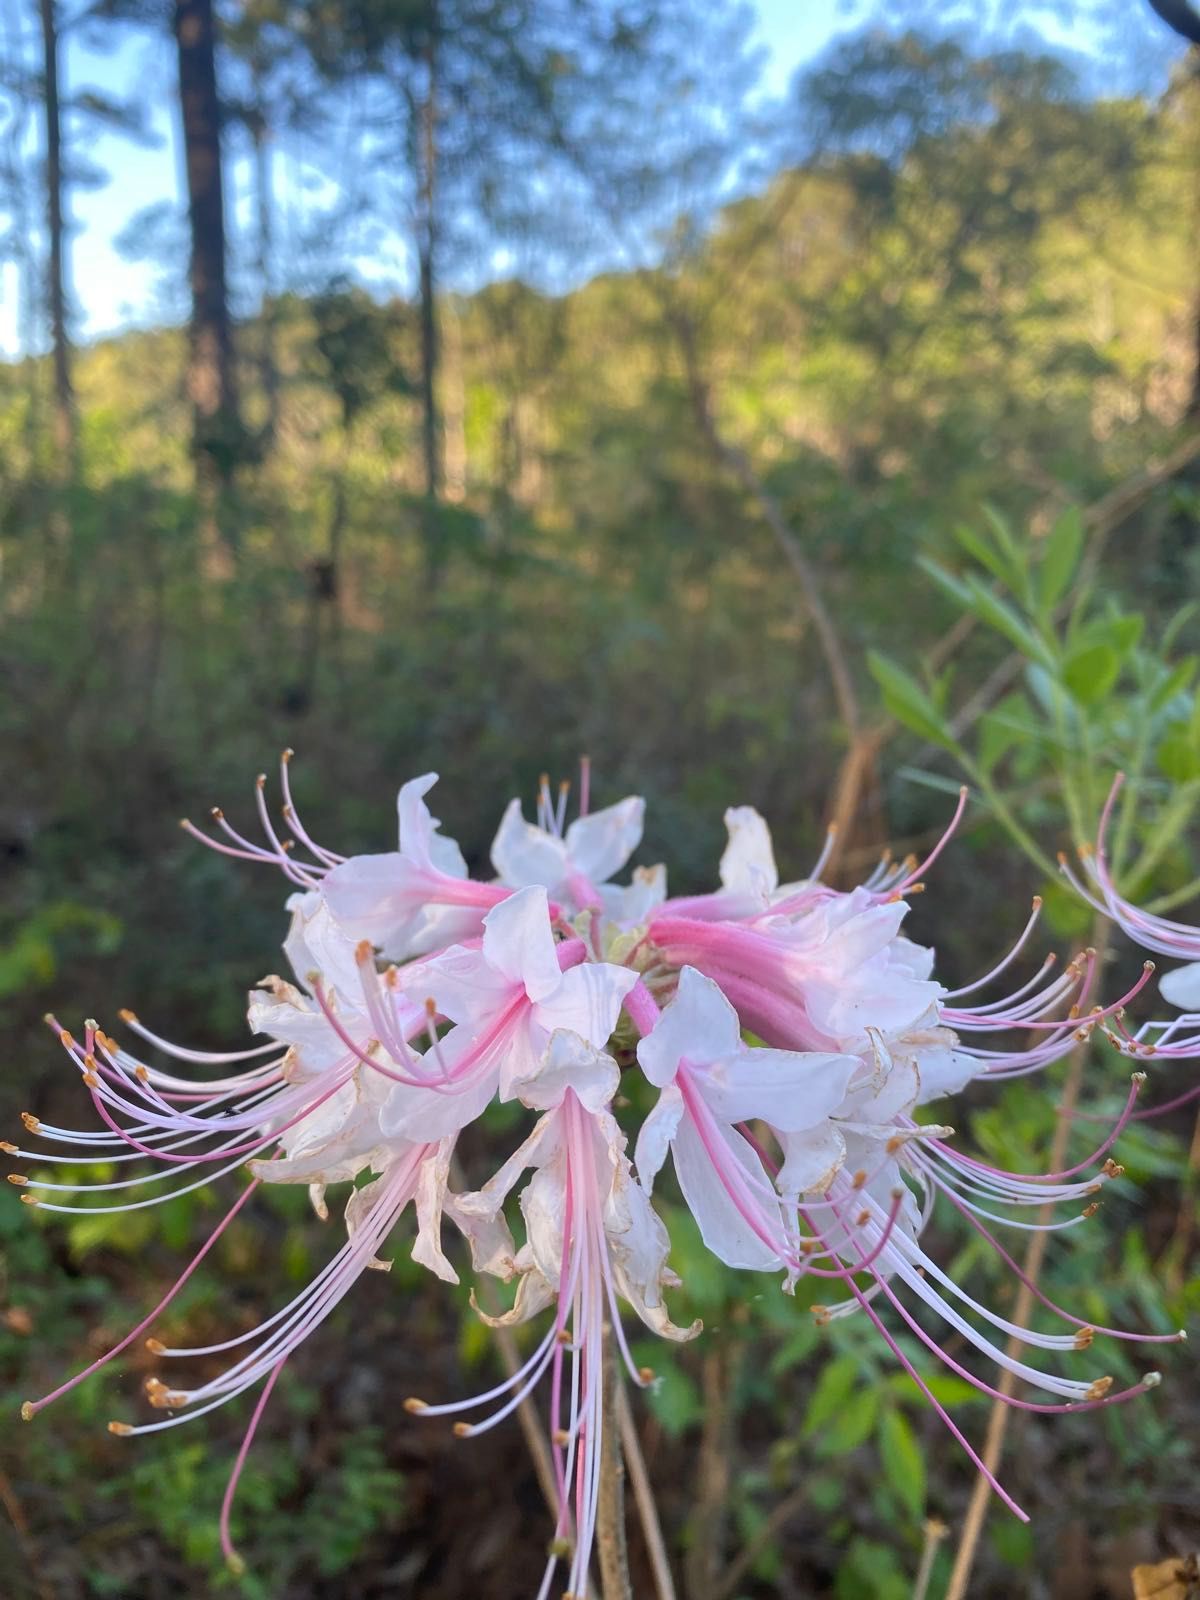 Ahh I found the source of my sneezing. Pink azaleas bloomin’ around these parts.